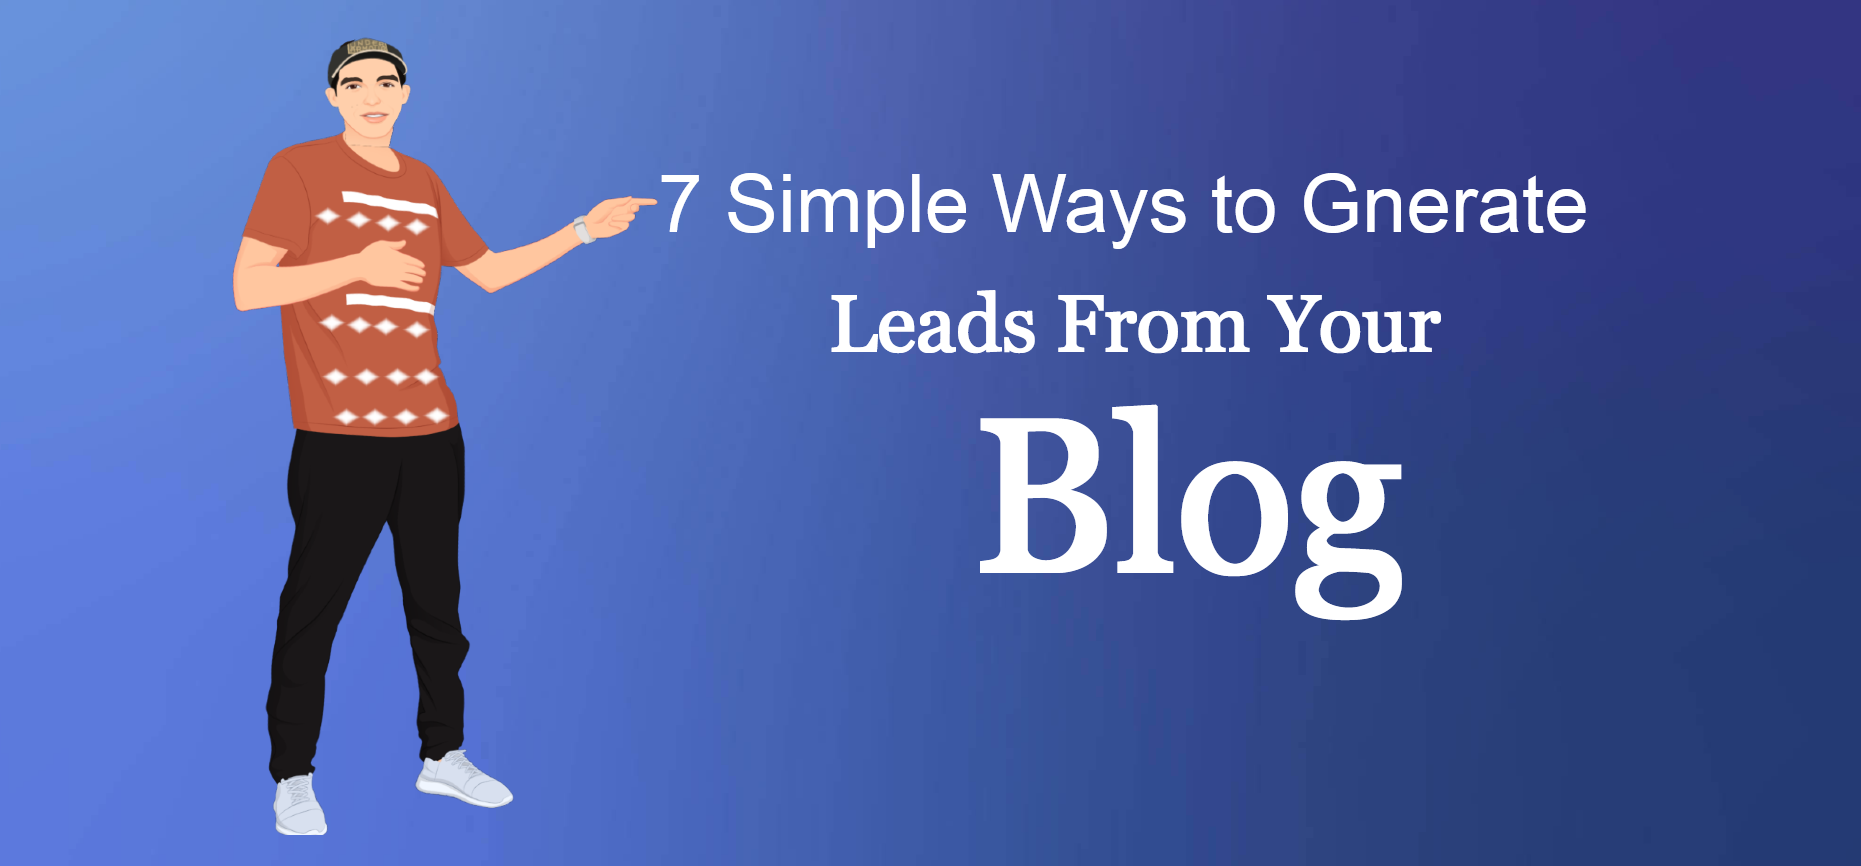 how to generate leads